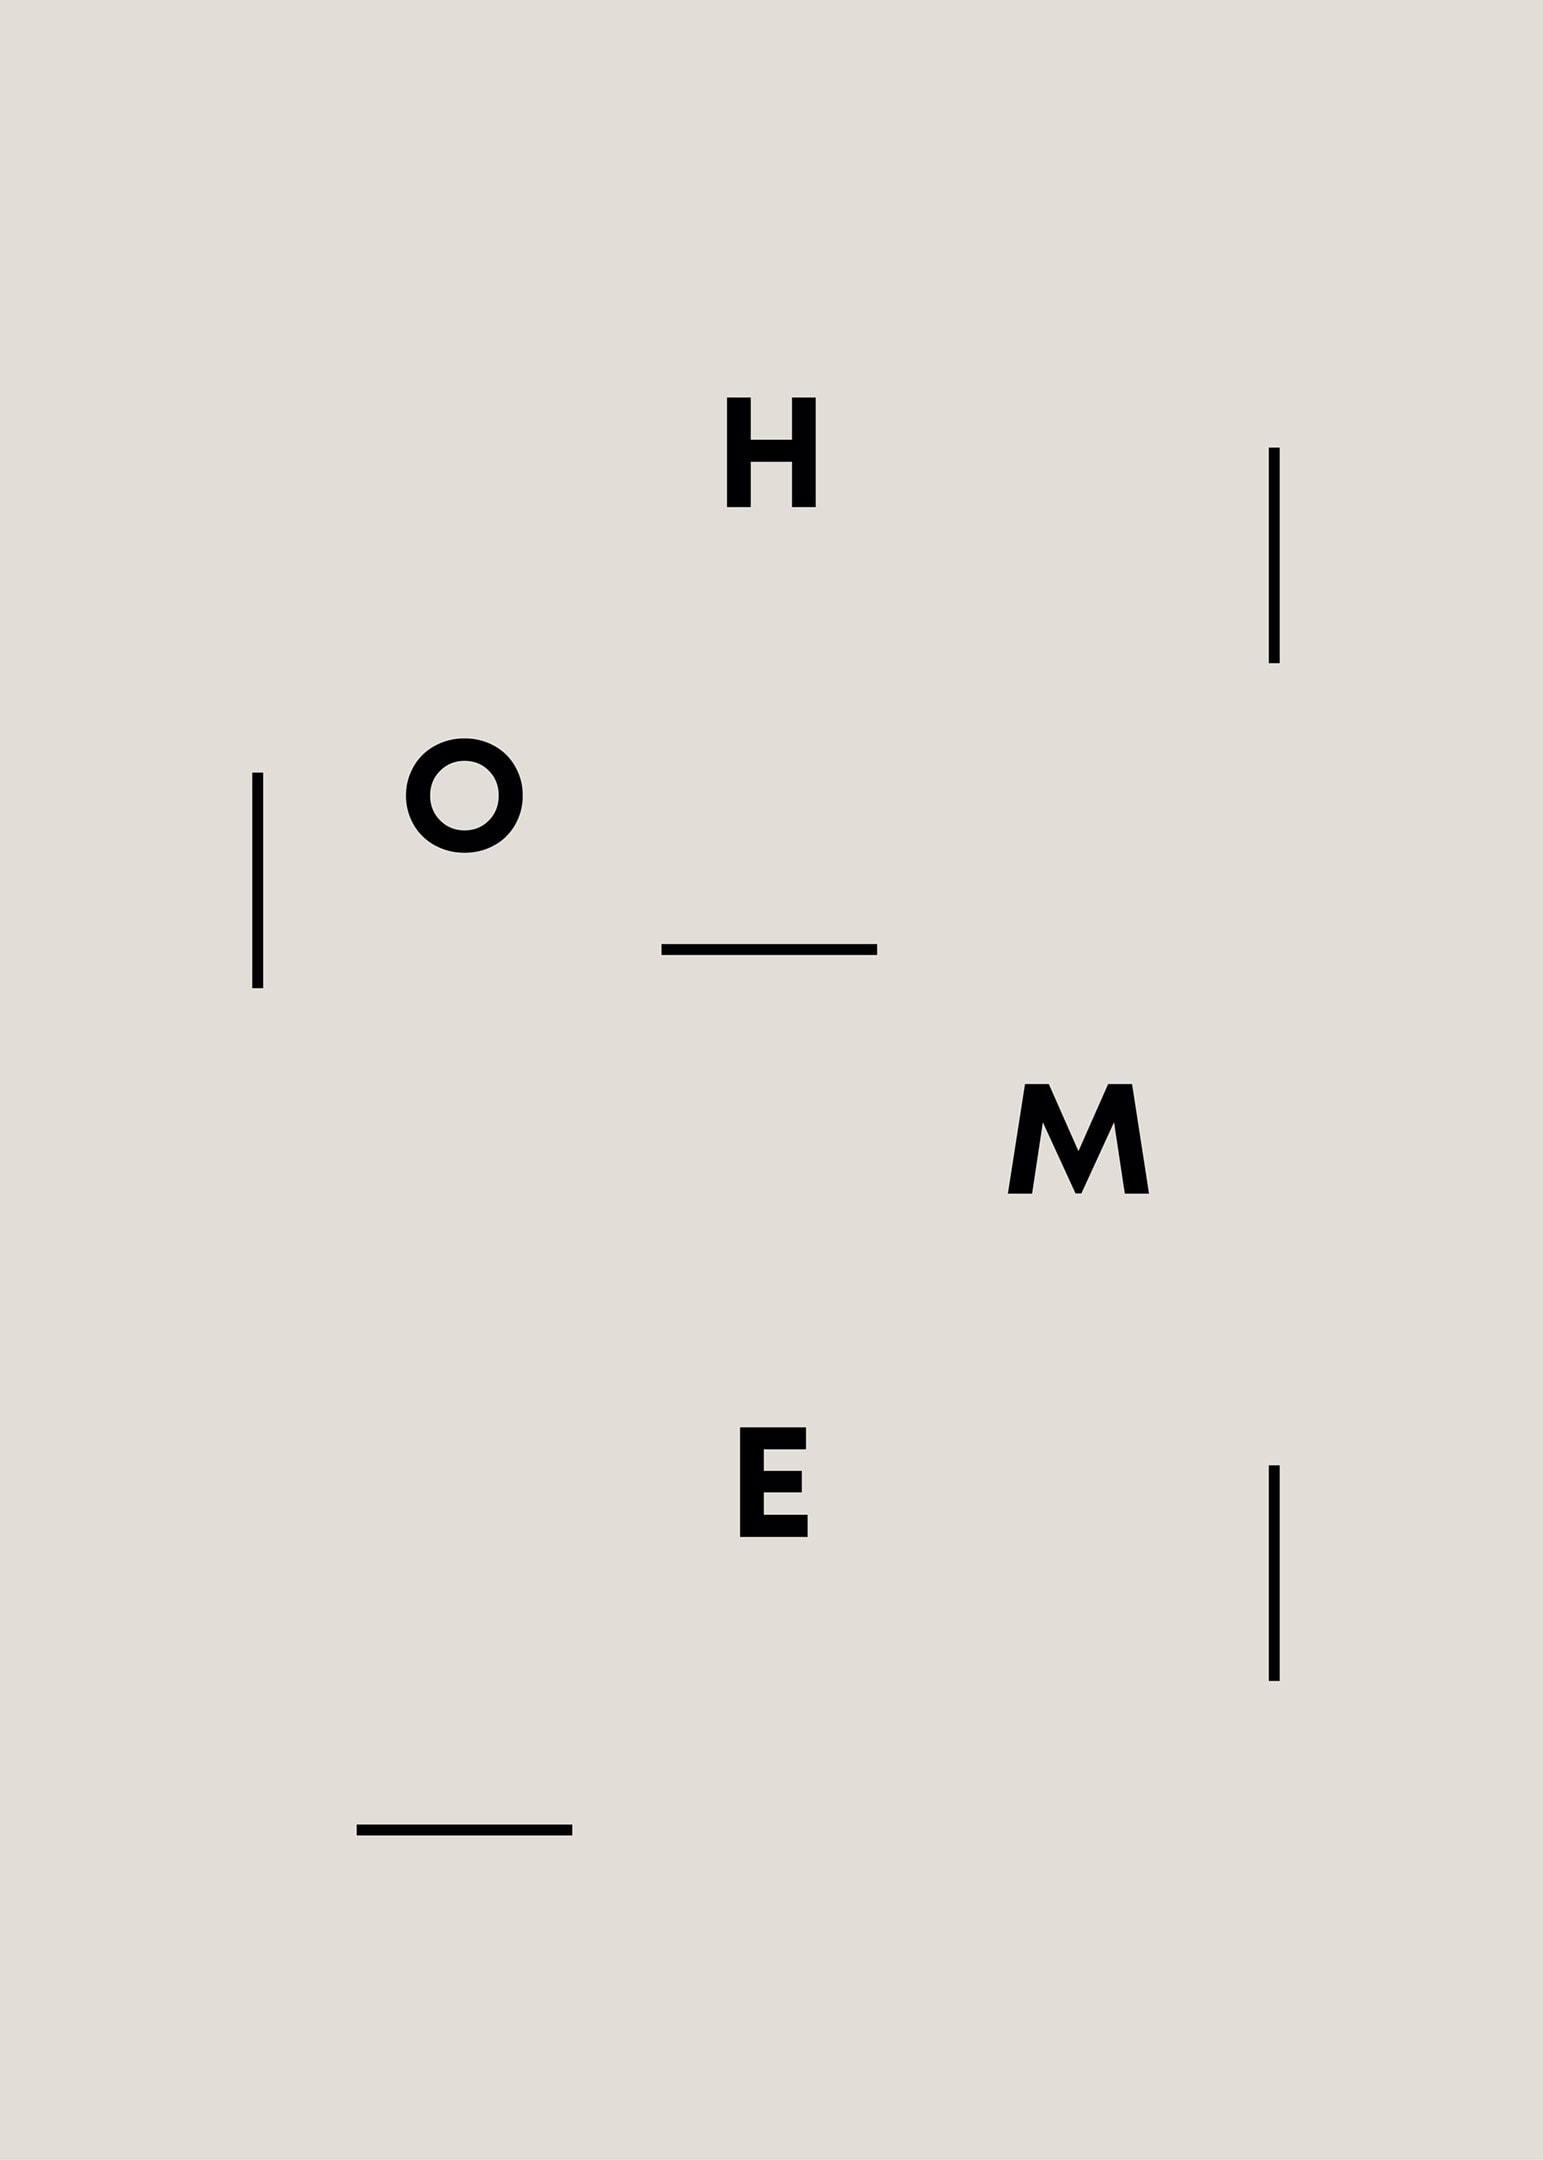 Home poster